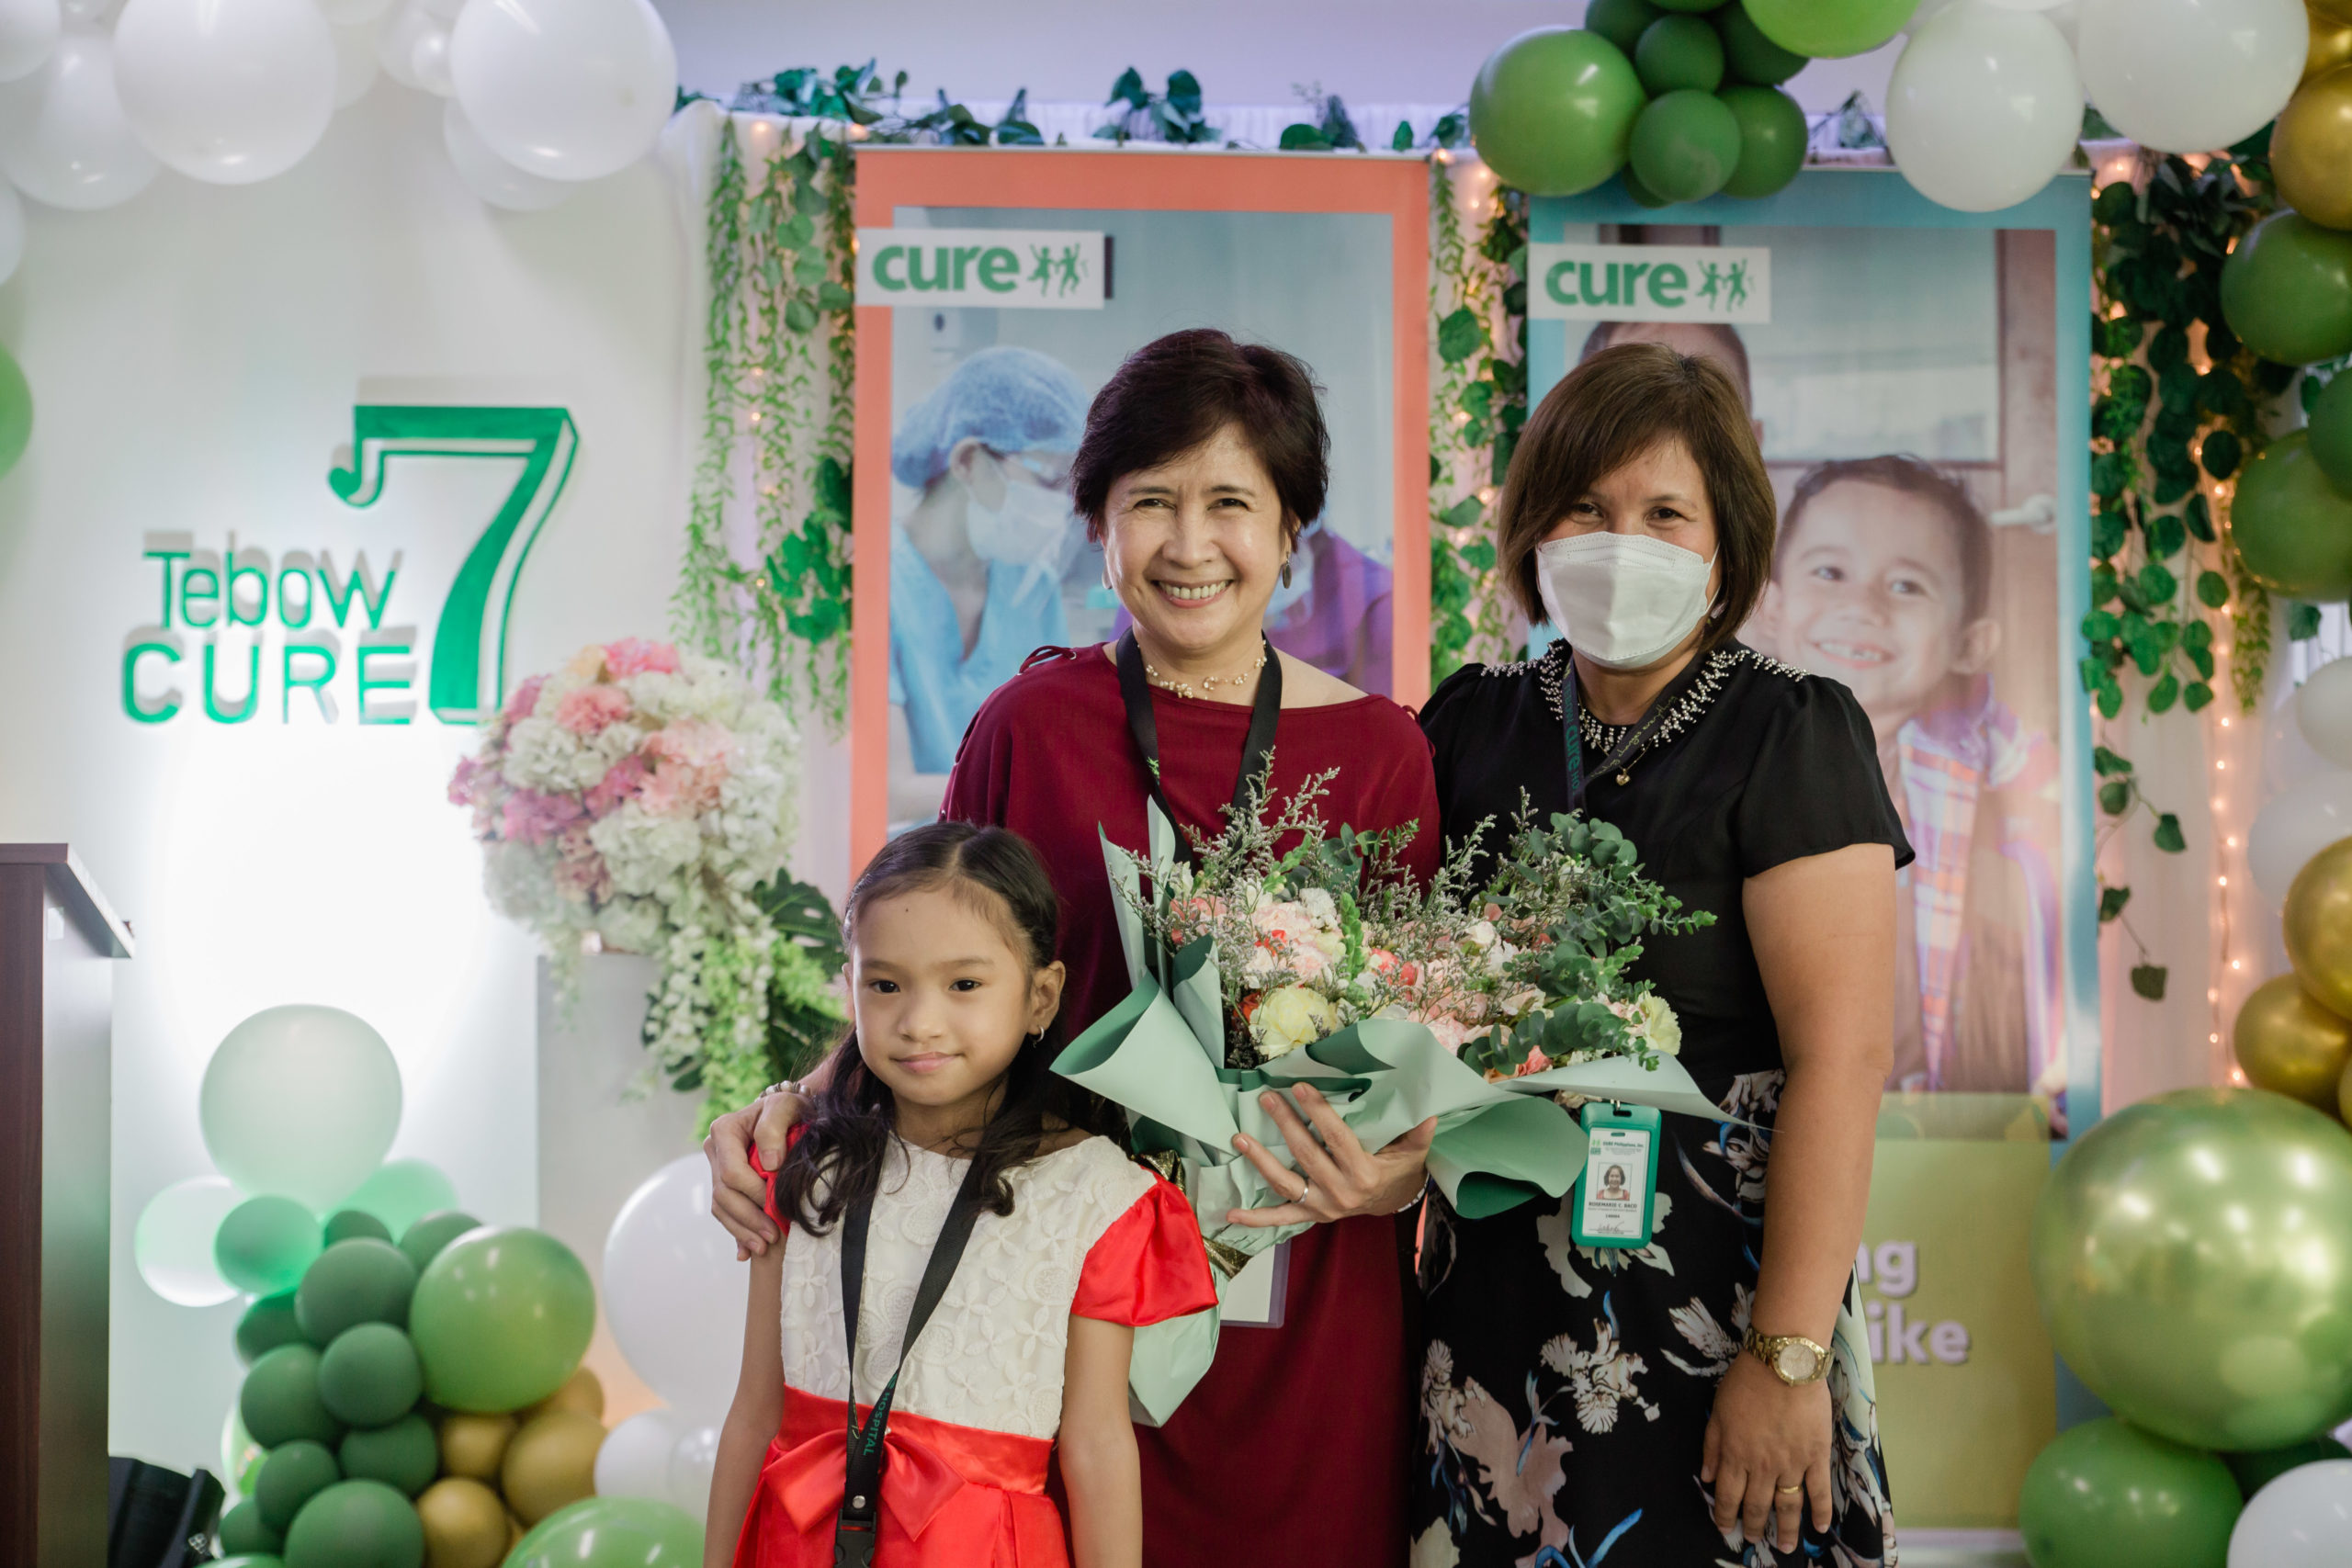 Tebow CURE Hospital in the Philippines Celebrates Seven Years of Impact